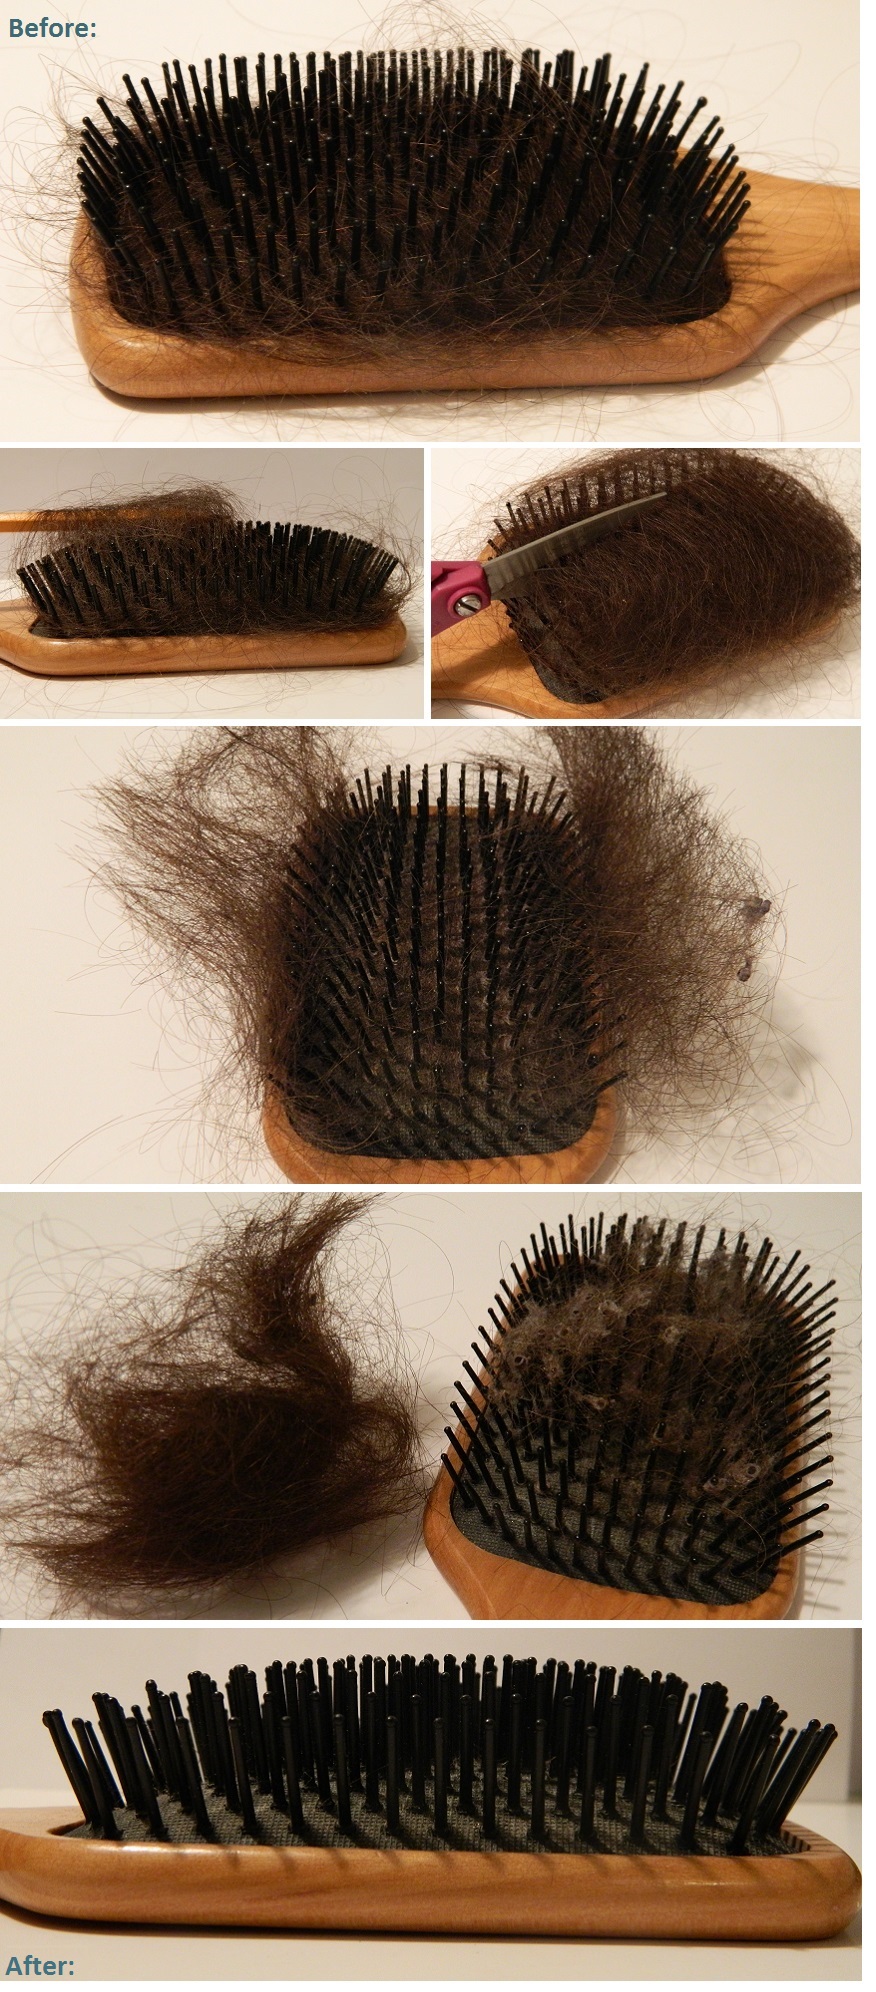 How to Properly Clean Your Hair Brush